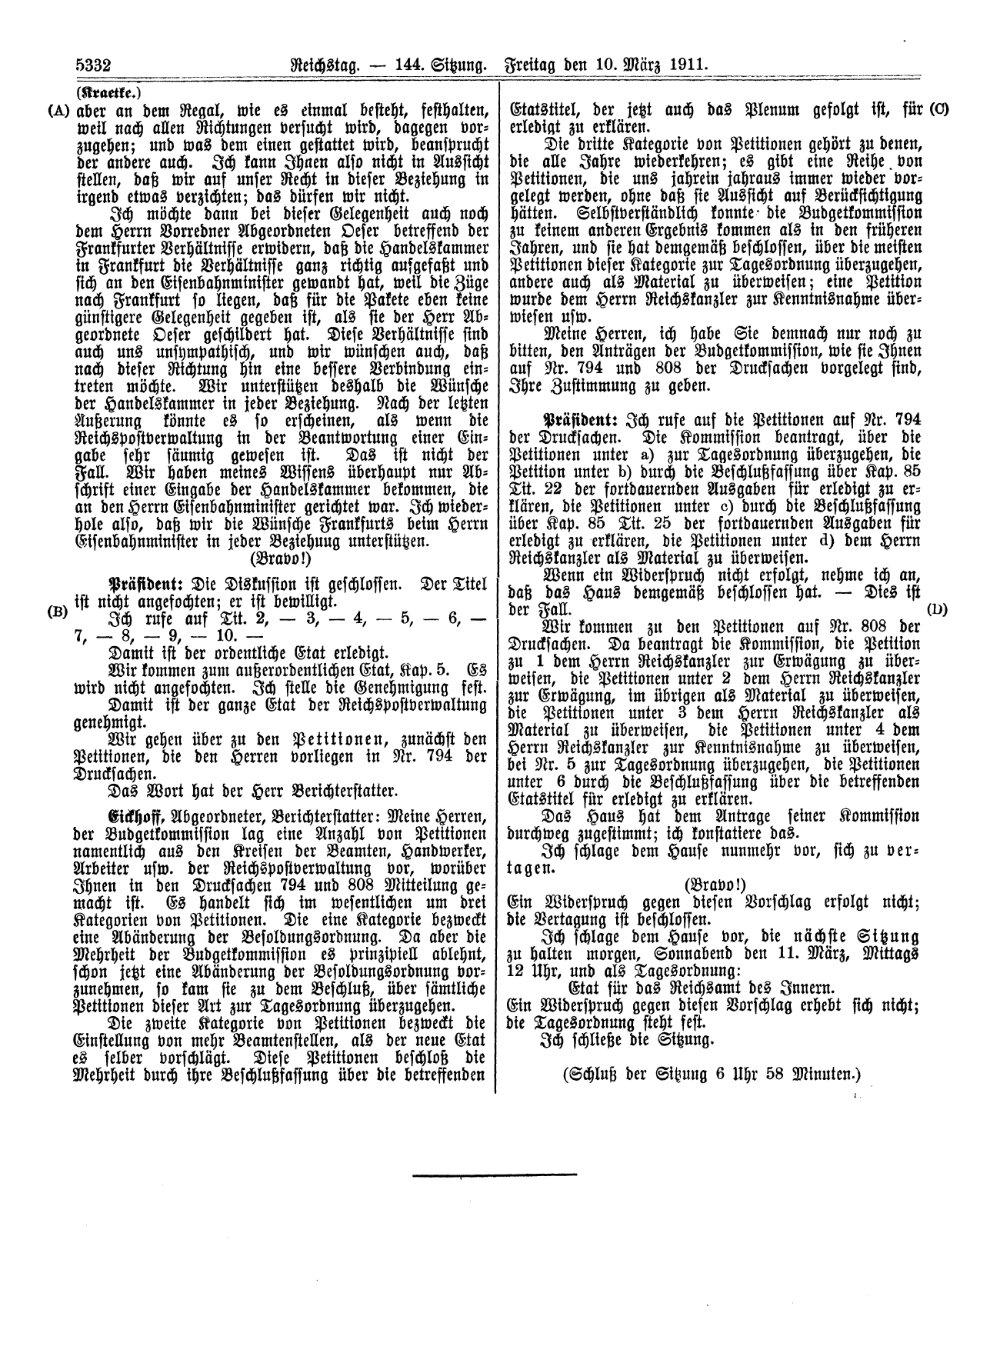 Scan of page 5332